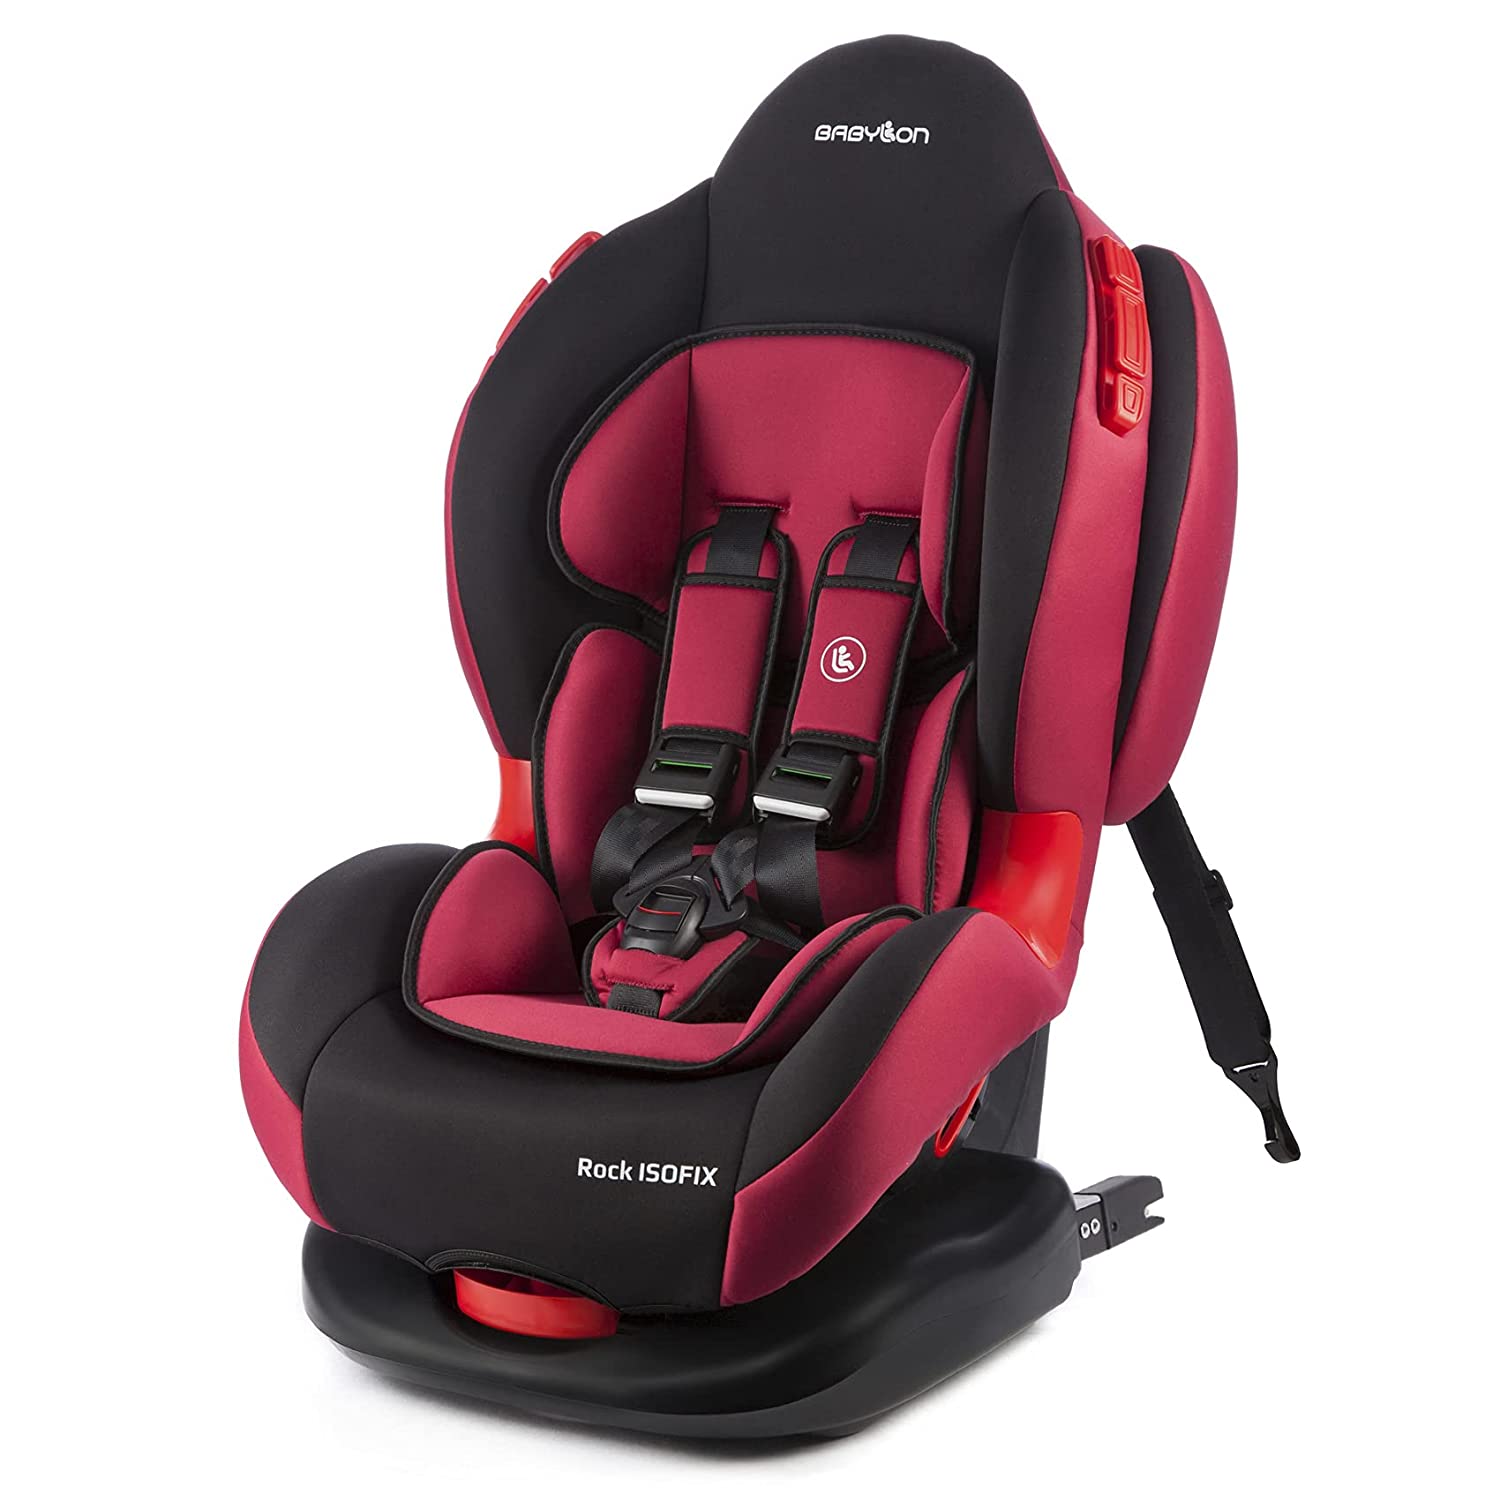 BABYLON Rock ISOFIX Baby Car Seat Group 1/2 Child Seat 9-25 kg (9 Months to 7 Years) Child Seat with Top Tether 5-Point Seat Belt ECE R44/0 Black / Red Marsala